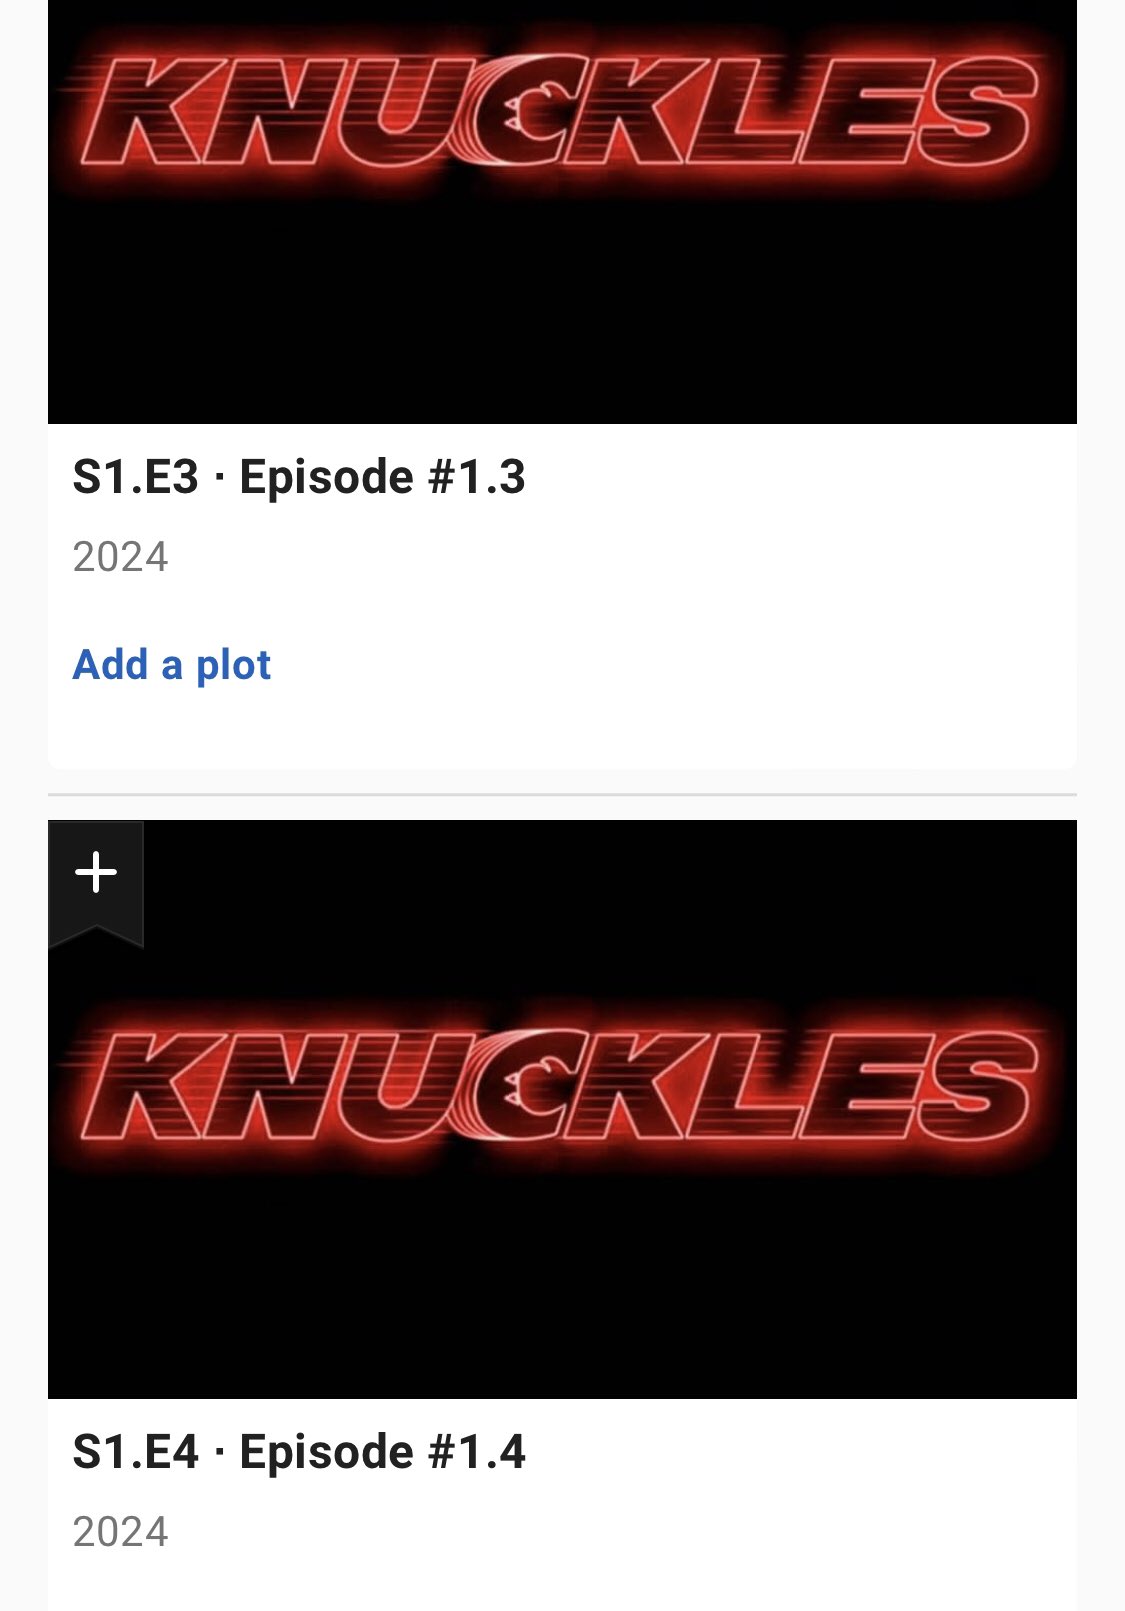 Sonic movienews on X: Now has IMDb also changed #knuckles series premiere  date from “November” to instead “2024” 🥊👀 #sonicmovie #sonicnews  #knucklesseries #KnucklesTheEchidna #sonic #idriselba #SonicTheHedegehog   / X